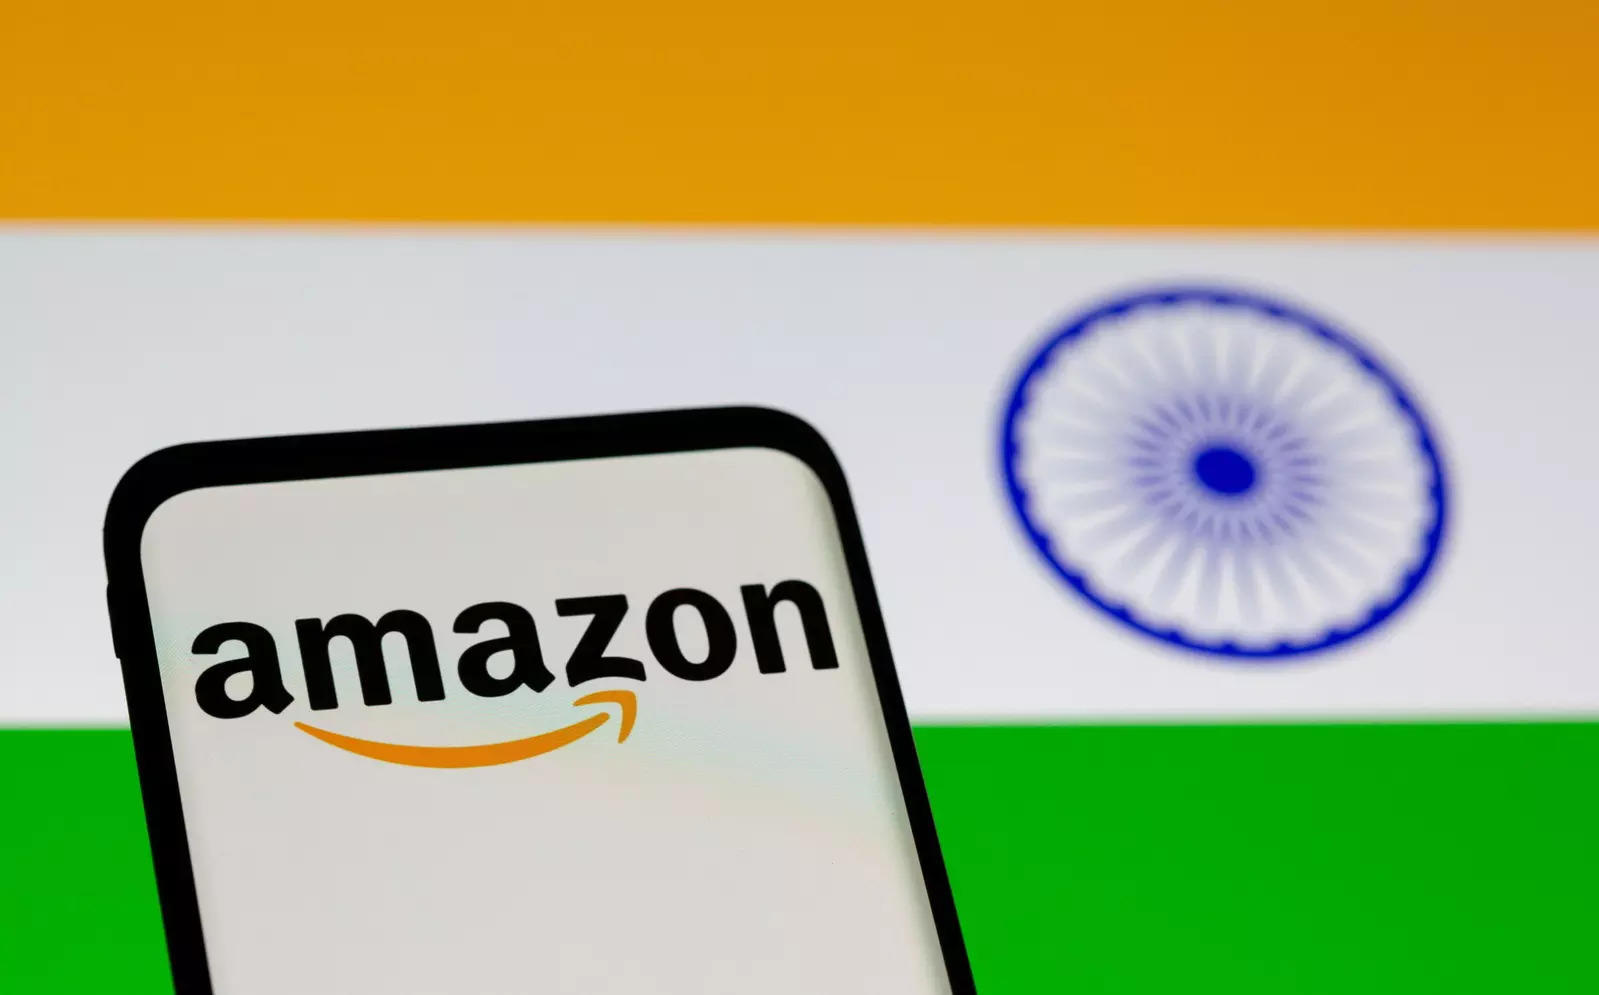 FILE PHOTO: Smartphone with Amazon logo is seen in front of displayed Indian flag in this illustration taken